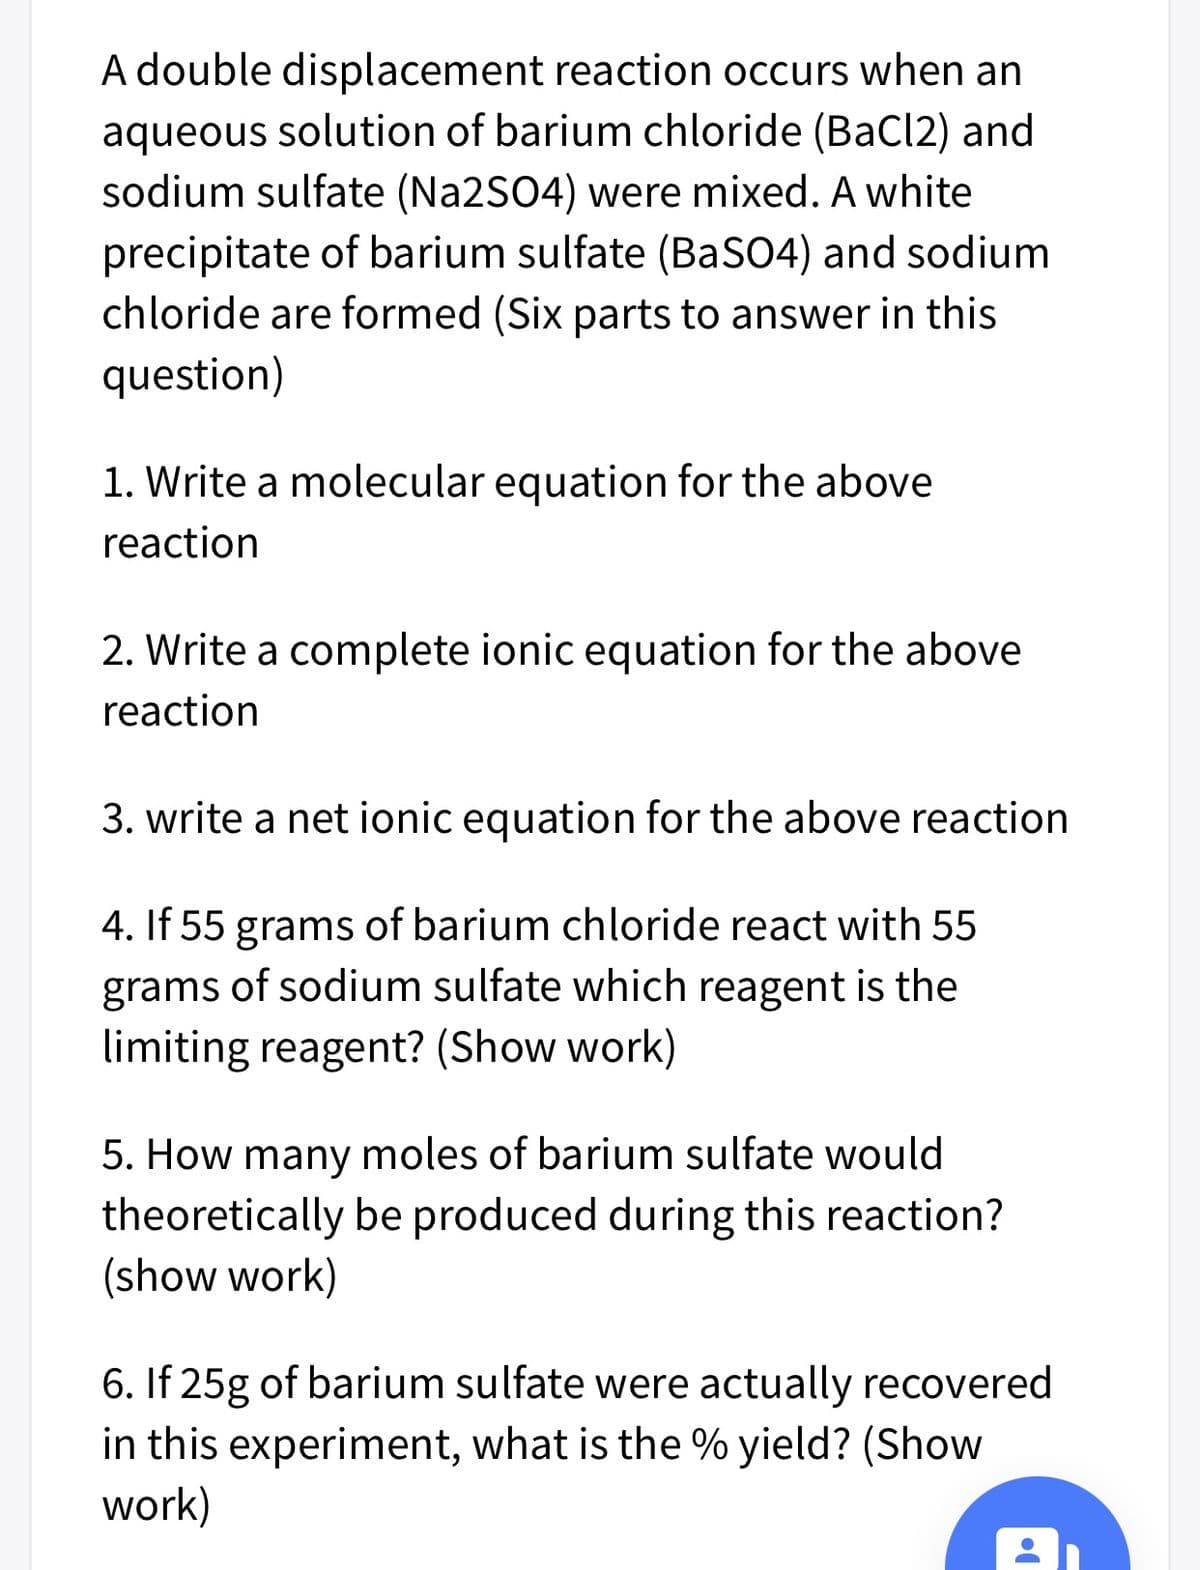 A double displacement reaction occurs when an
aqueous solution of barium chloride (BaCl2) and
sodium sulfate (Na2SO4) were mixed. A white
precipitate of barium sulfate (BaSO4) and sodium
chloride are formed (Six parts to answer in this
question)
1. Write a molecular equation for the above
reaction
2. Write a complete ionic equation for the above
reaction
3. write a net ionic equation for the above reaction
4. If 55 grams of barium chloride react with 55
grams of sodium sulfate which reagent is the
limiting reagent? (Show work)
5. How many moles of barium sulfate would
theoretically be produced during this reaction?
(show work)
6. If 25g of barium sulfate were actually recovered
in this experiment, what is the % yield? (Show
work)
